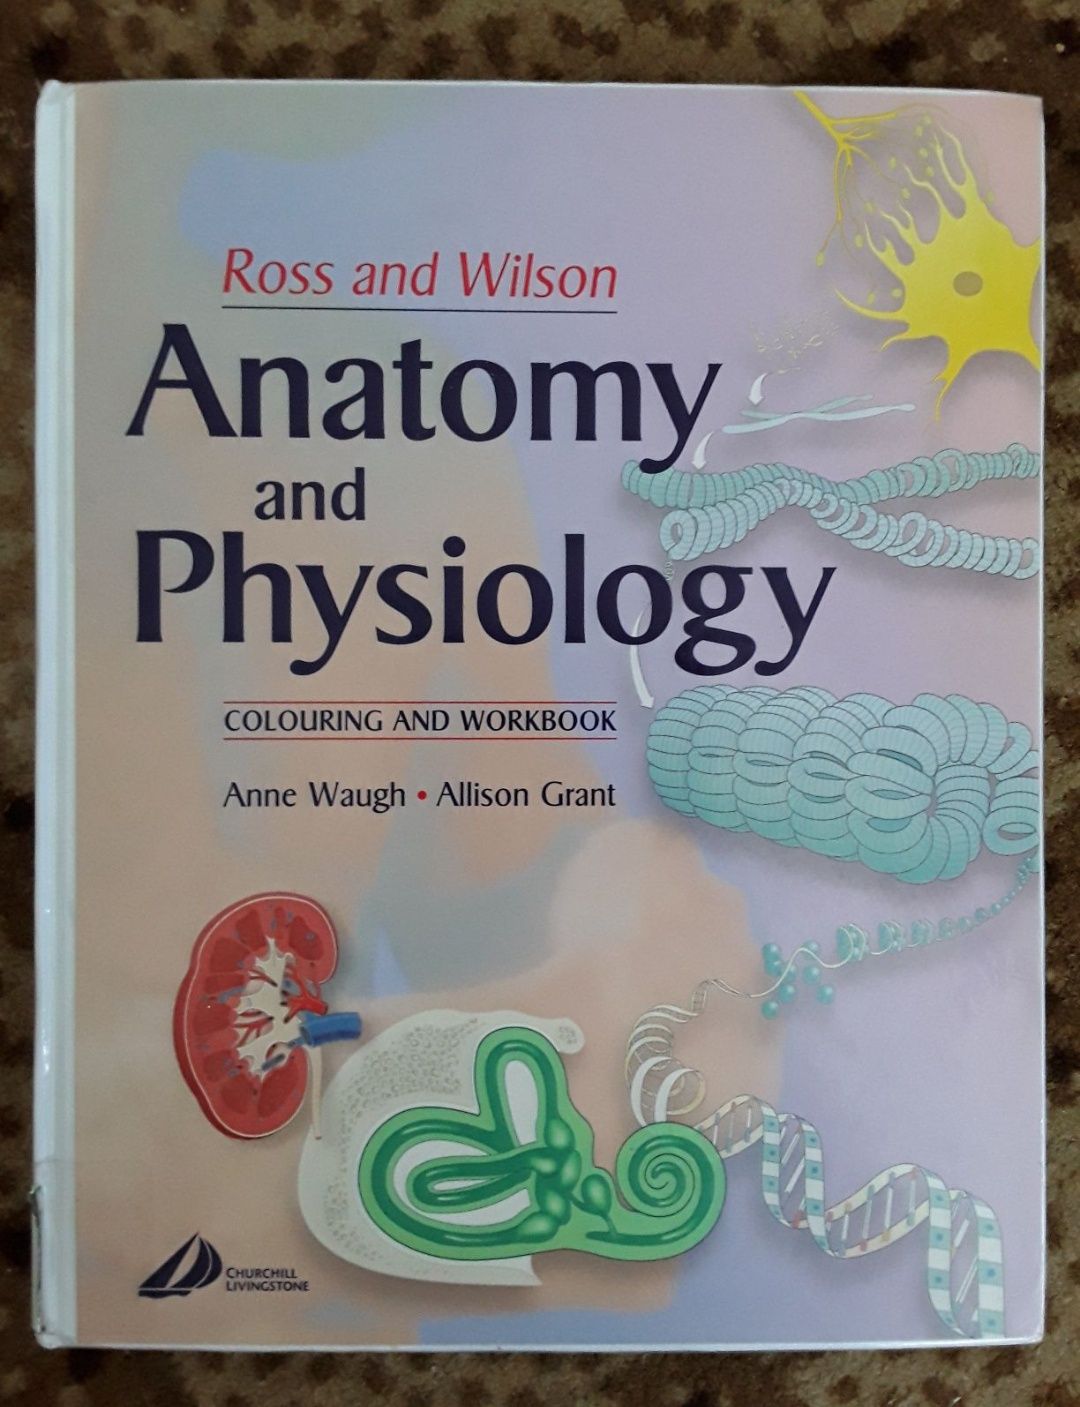 Anatomy and Physiology Ross and Wilson.